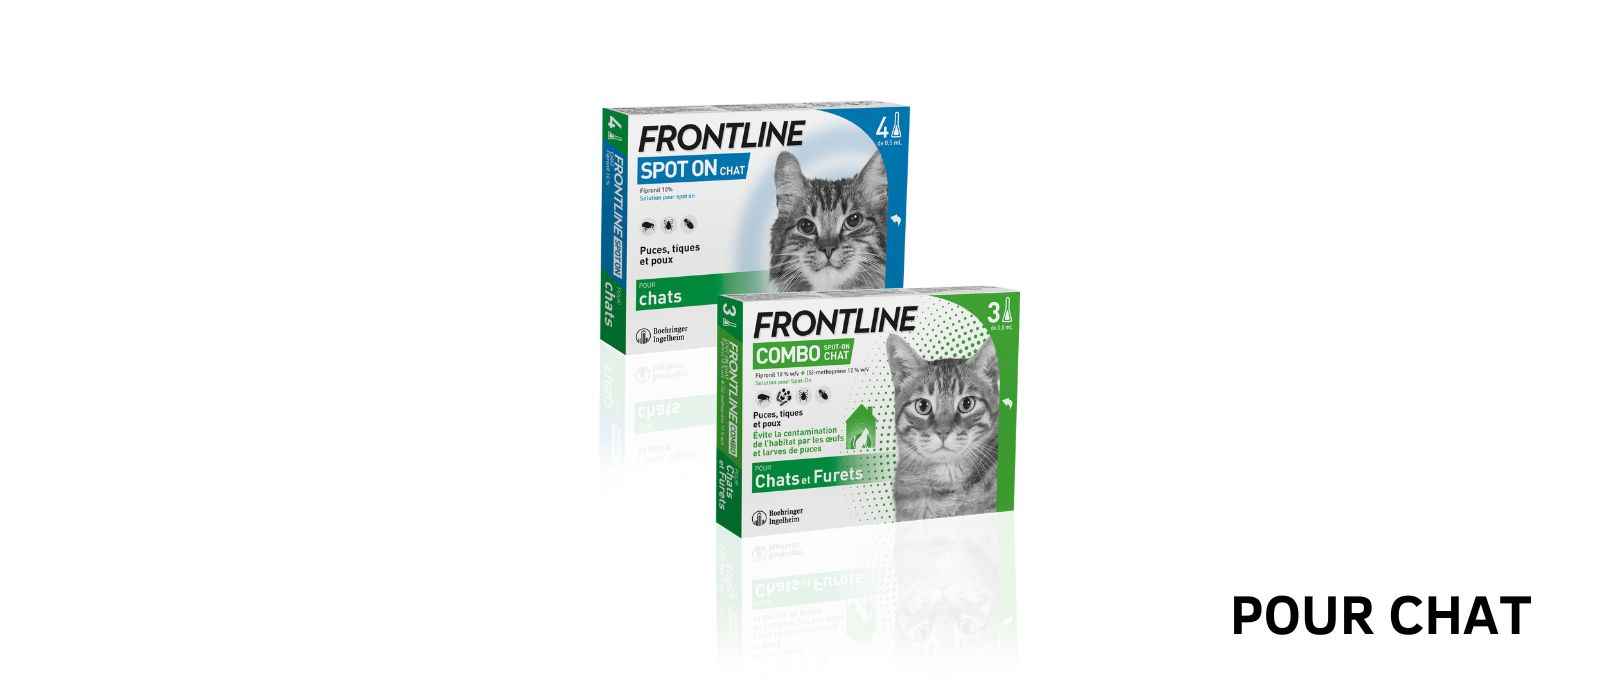 Frontline antiparasitaires pour chats